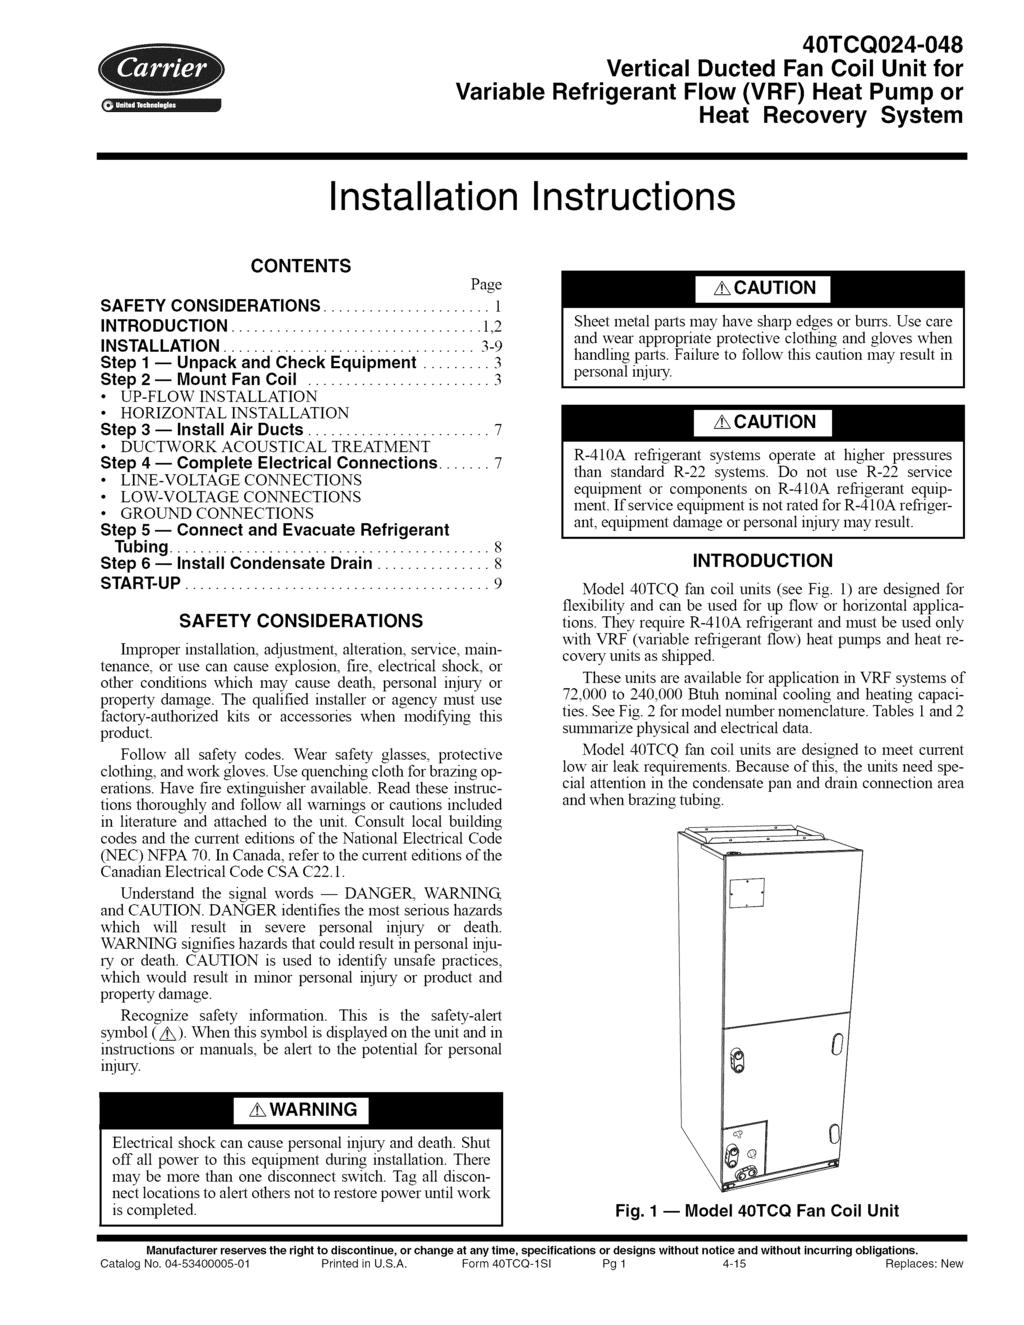 40TCQ024-048 Vertical Ducted Fan Coil Unit for Variable Refrigerant Flow (VRF) Heat Pump or Heat Recovery System Installation Instructions CONTENTS Page SAFETY CONSIDERATIONS... 1 INTRODUCTION.